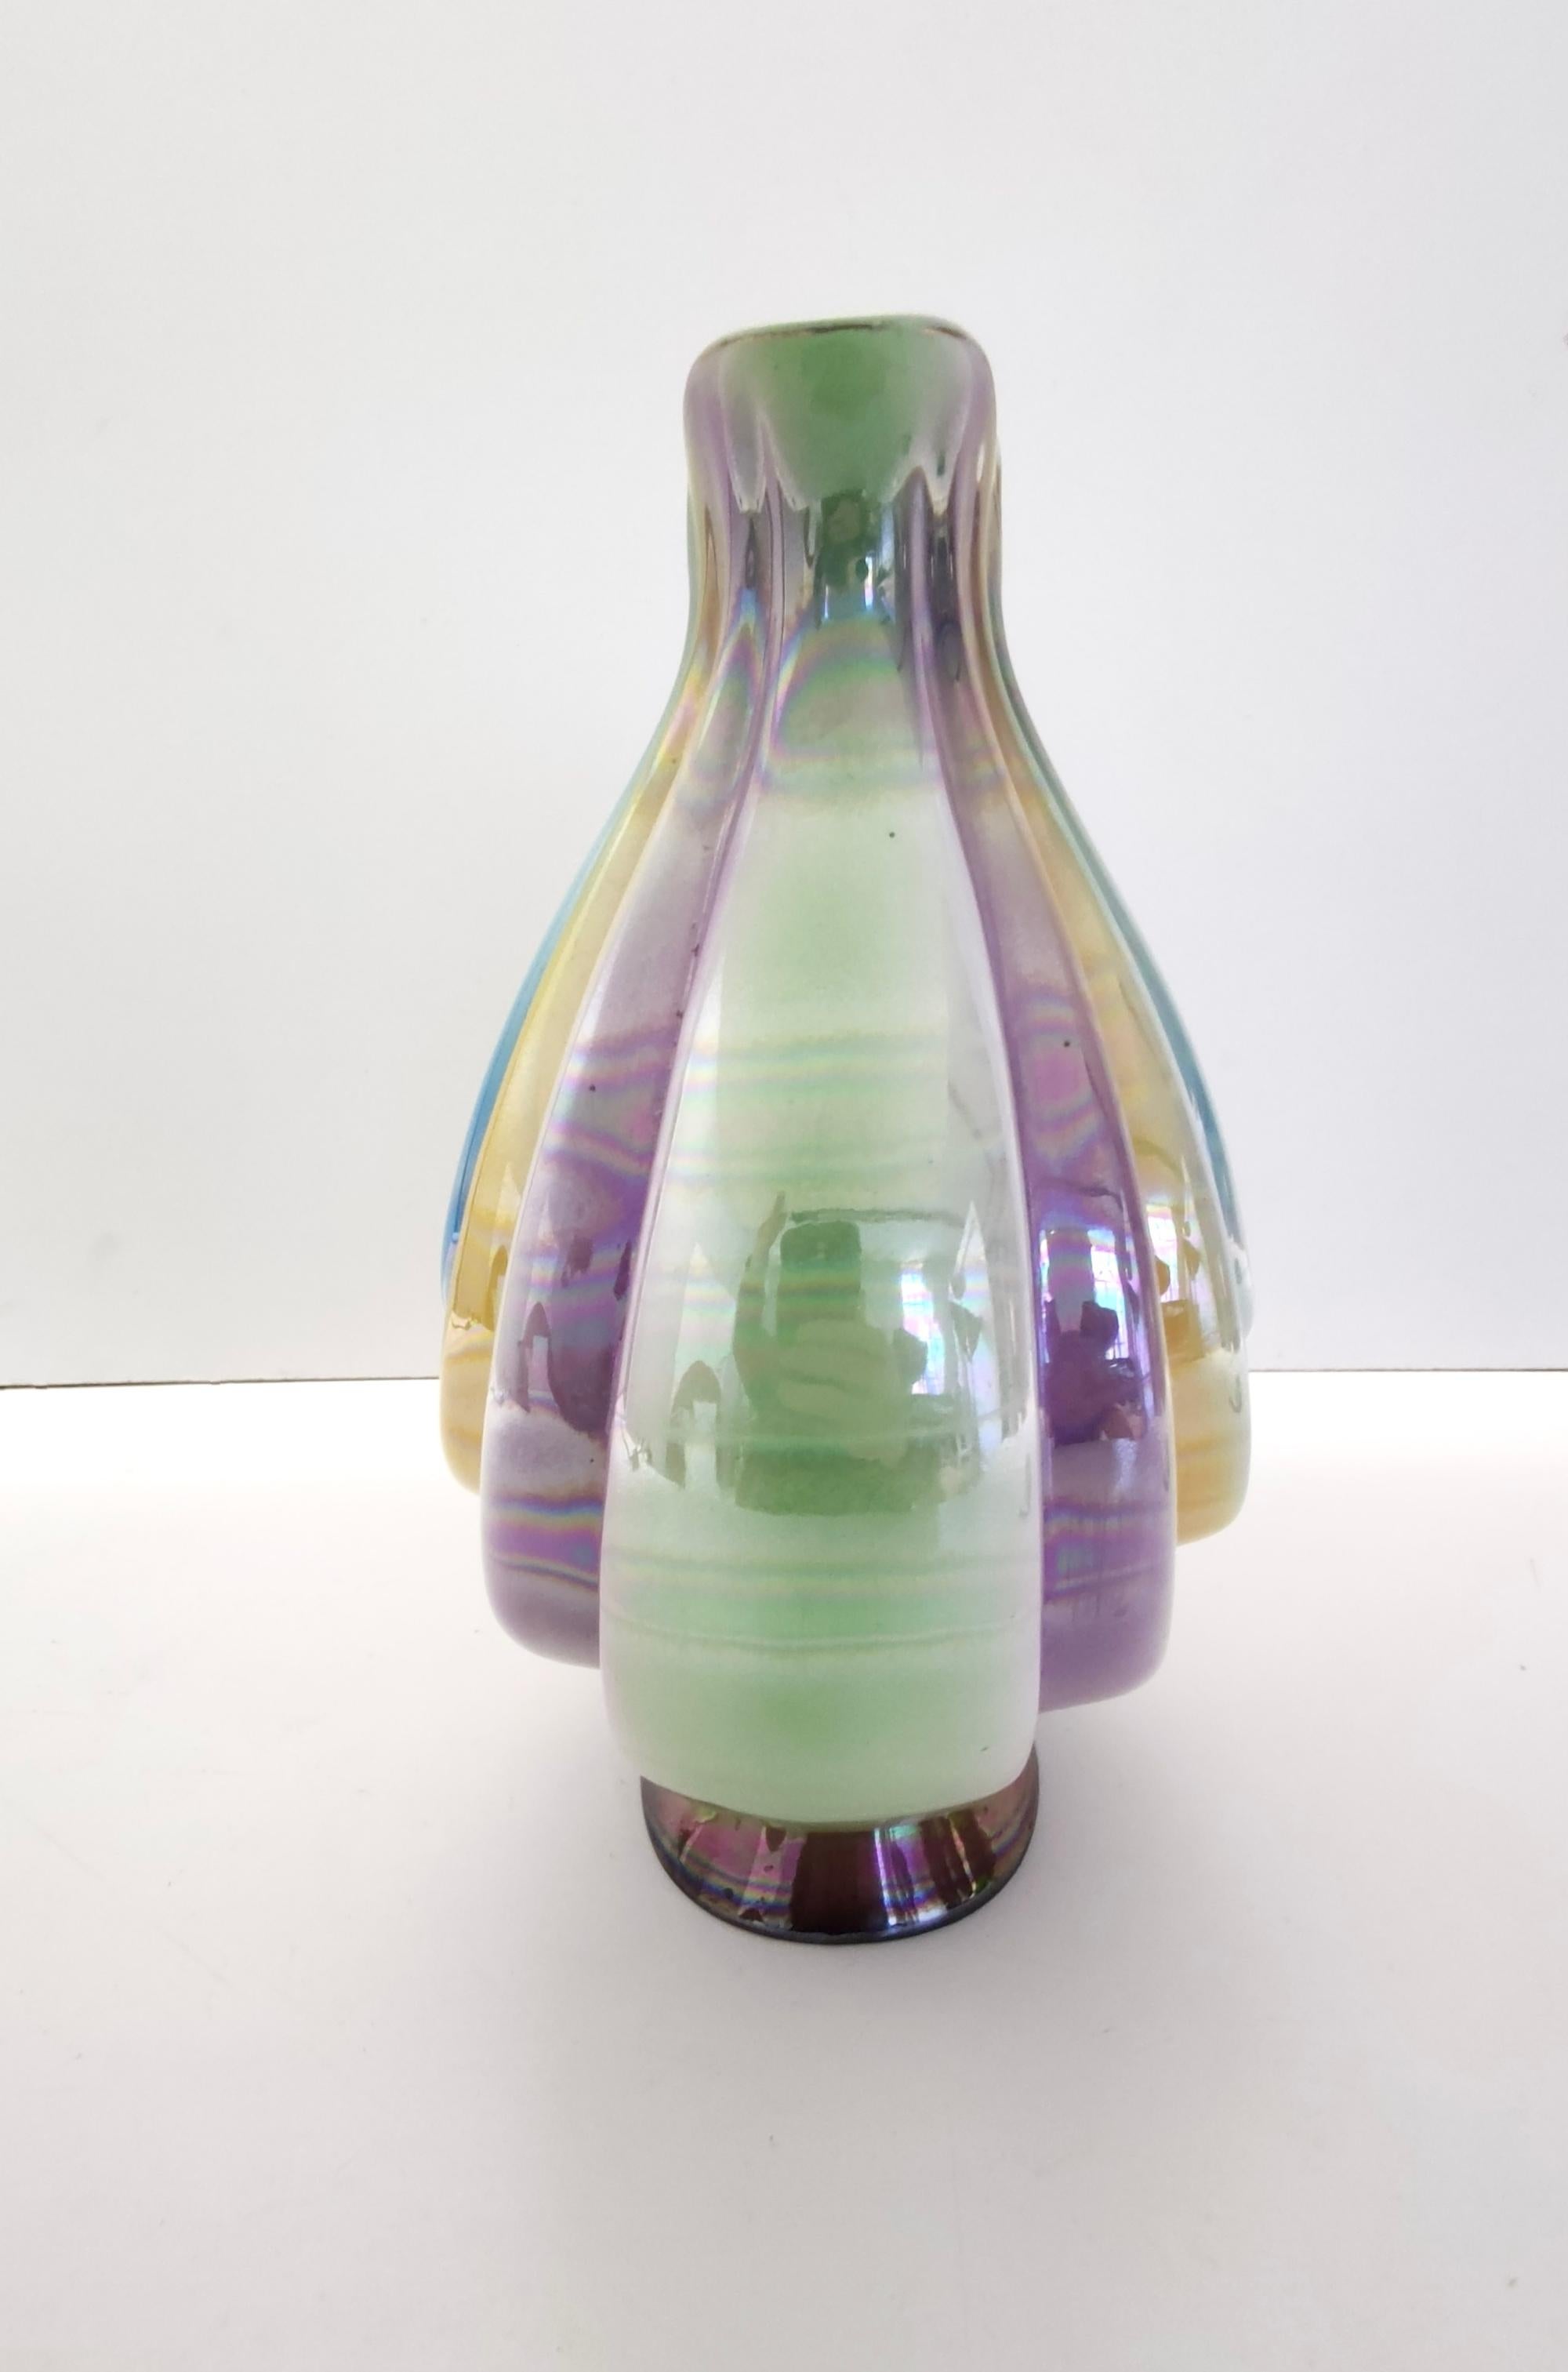 Mid-20th Century Vintage Ceramic Vase Attributed to Italo Casini with Iridescent Colors, Italy For Sale